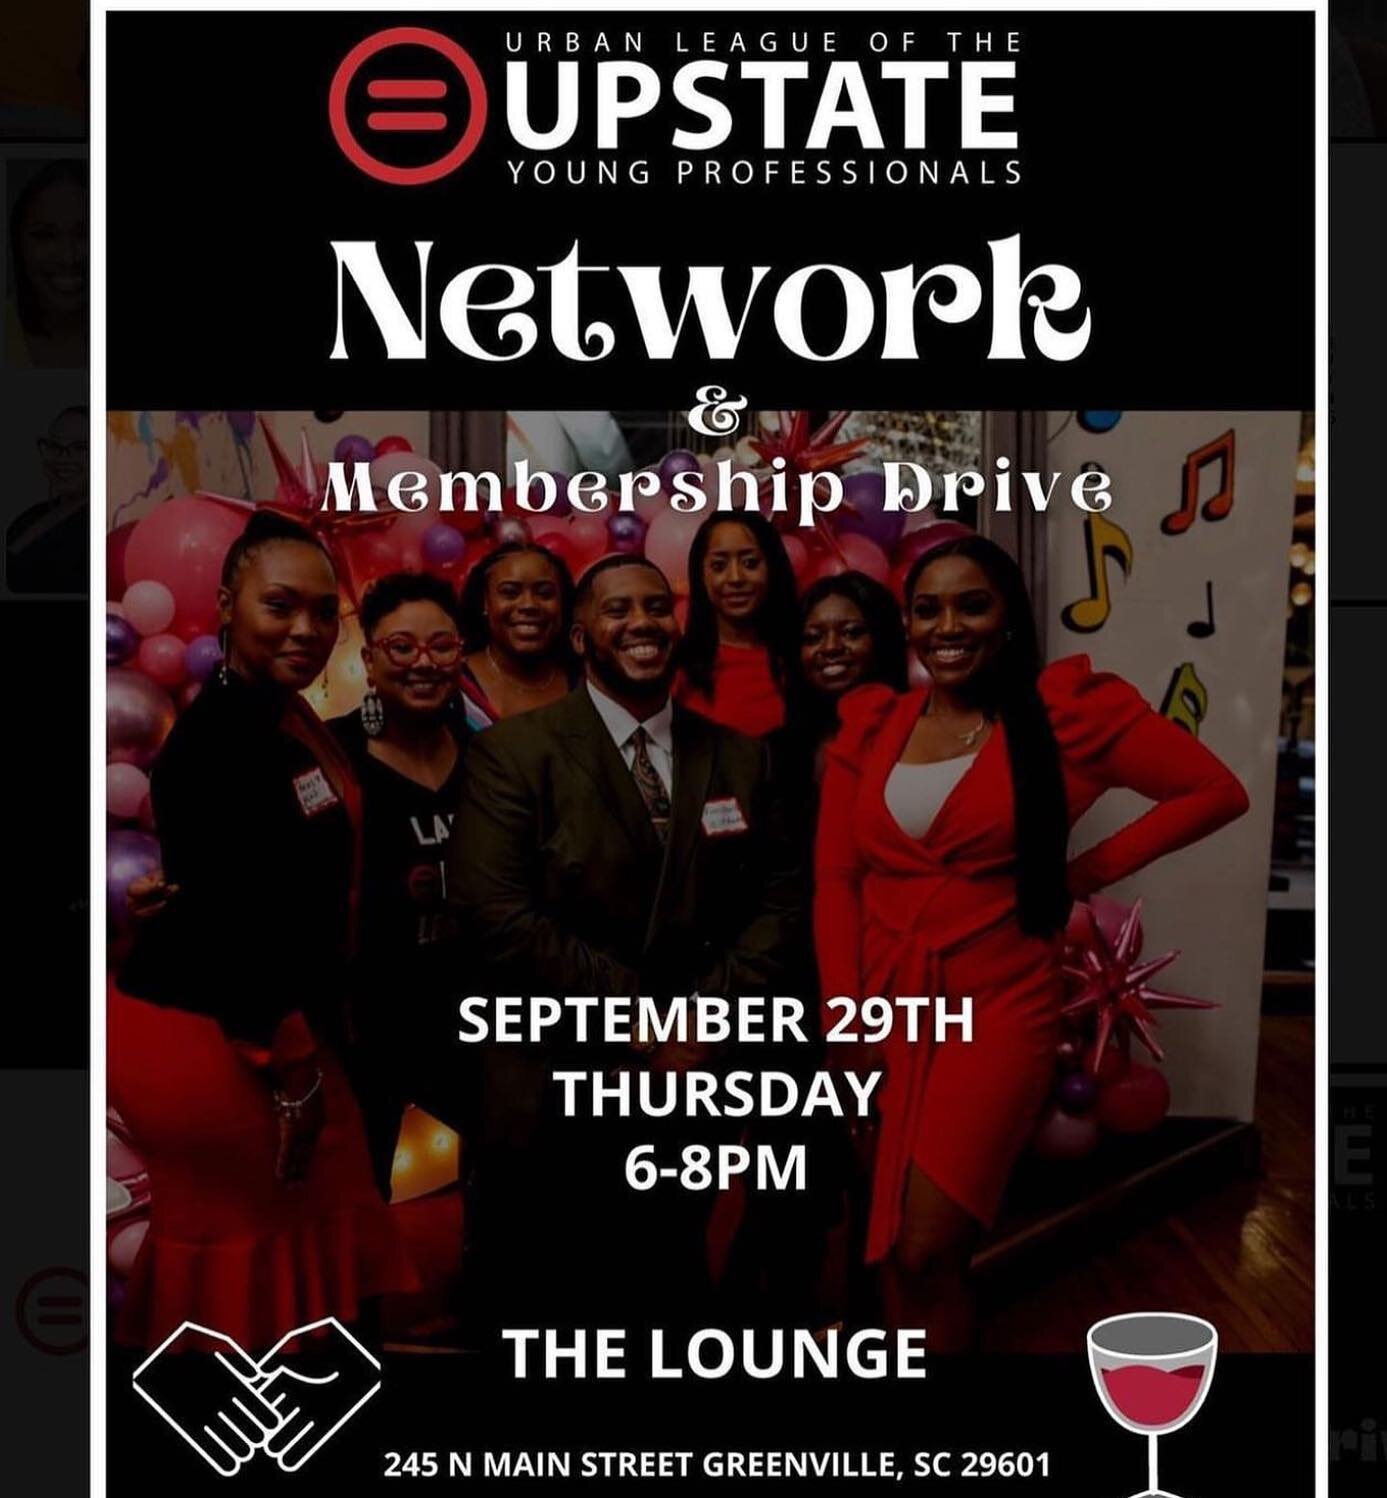 This THURSDAY!!! @uluyp with @youngbrothersacademy will be @theloungegvl for a networking event and to drive new members.. If you&rsquo;re looking to get involved in a great organization plan to attend this Thursday!! Last month was a blast!